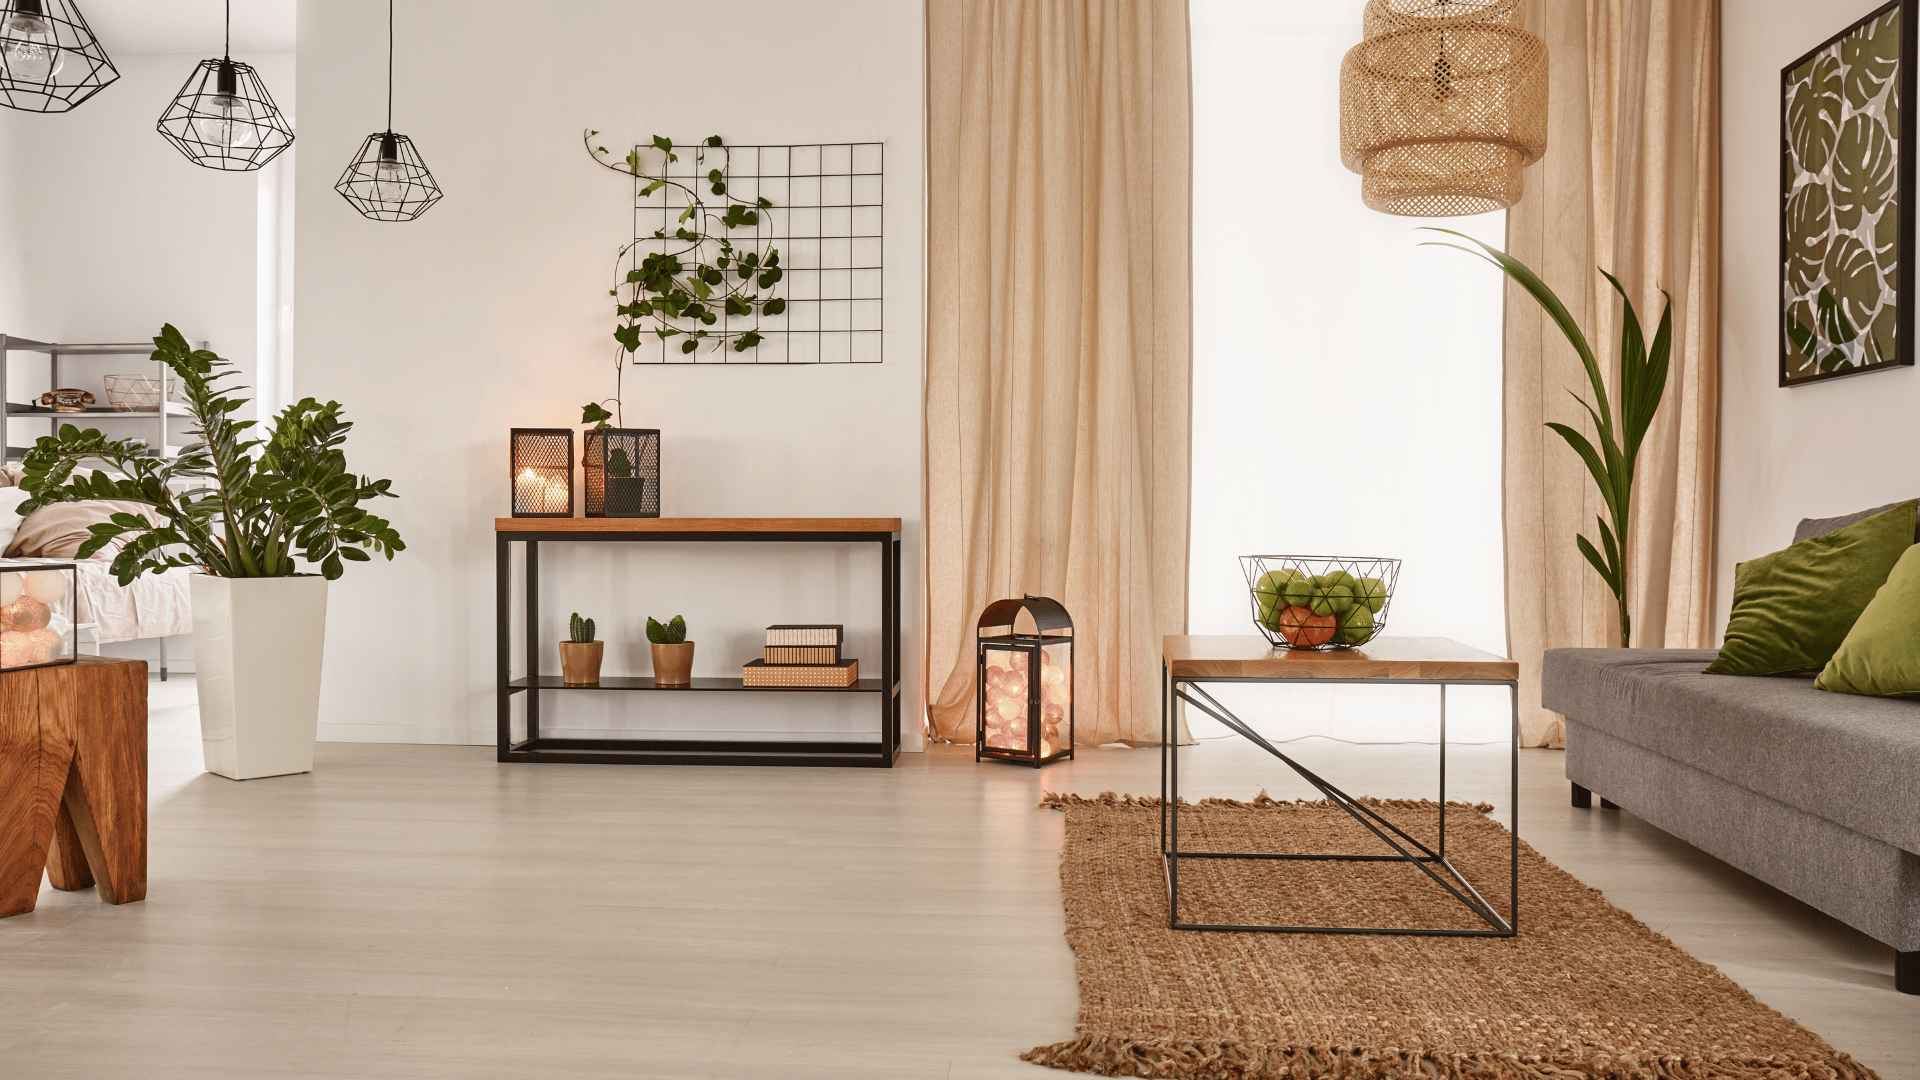 Nature Inspired Serenity with Earth Tones Colors That Calm: The Psychology of Serene Interiors - 4